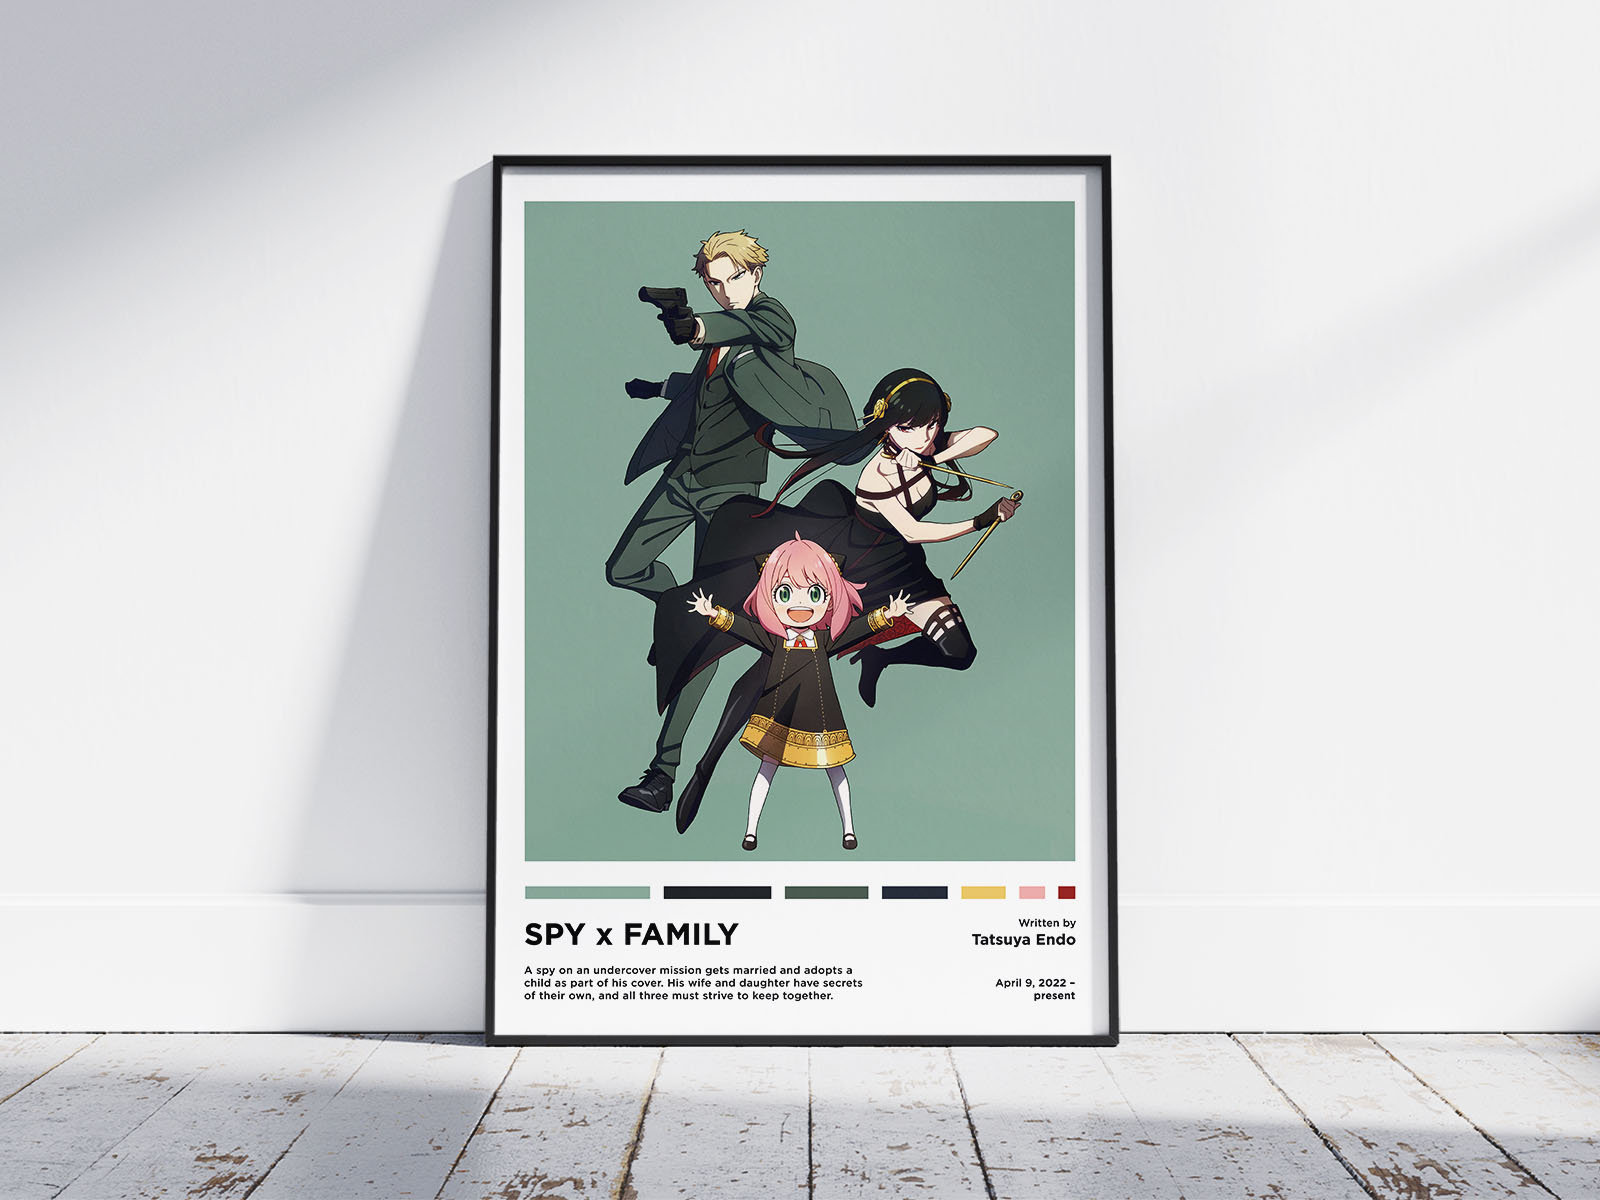 Anya Spy X Family Anime Wallpaper 3D Lenticular Print Poster Customize 3D  Lenticular Flip Picture Wall Sticker Home Decor Gifts